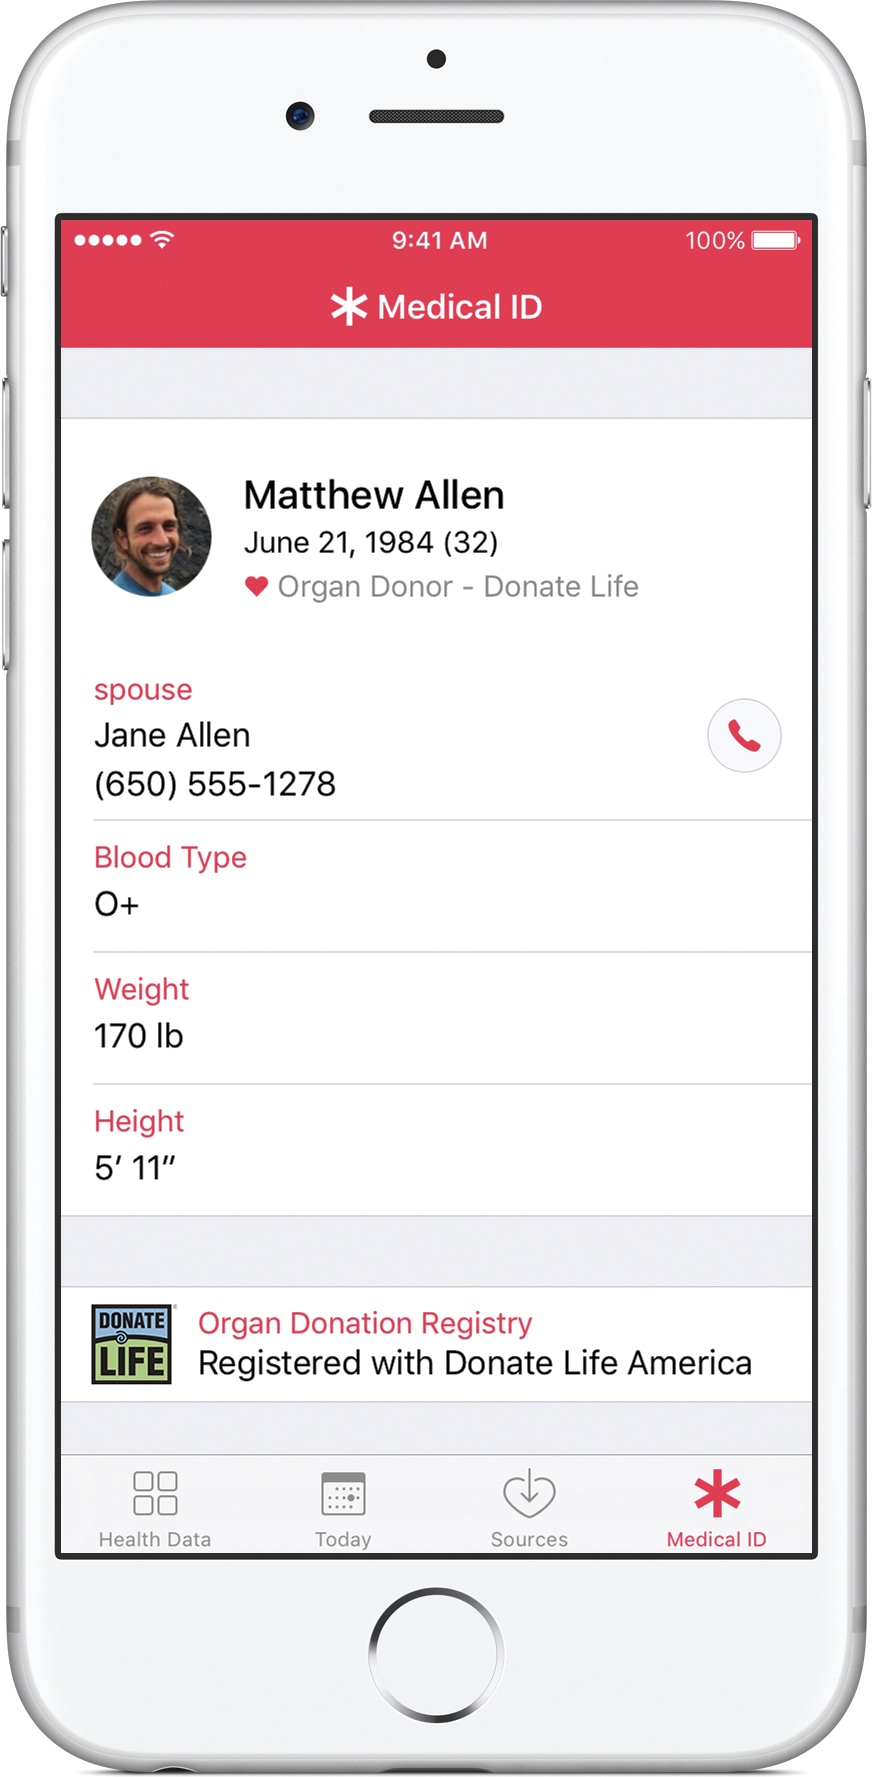 iOS 10 will bring new option for organ donation within the Health app